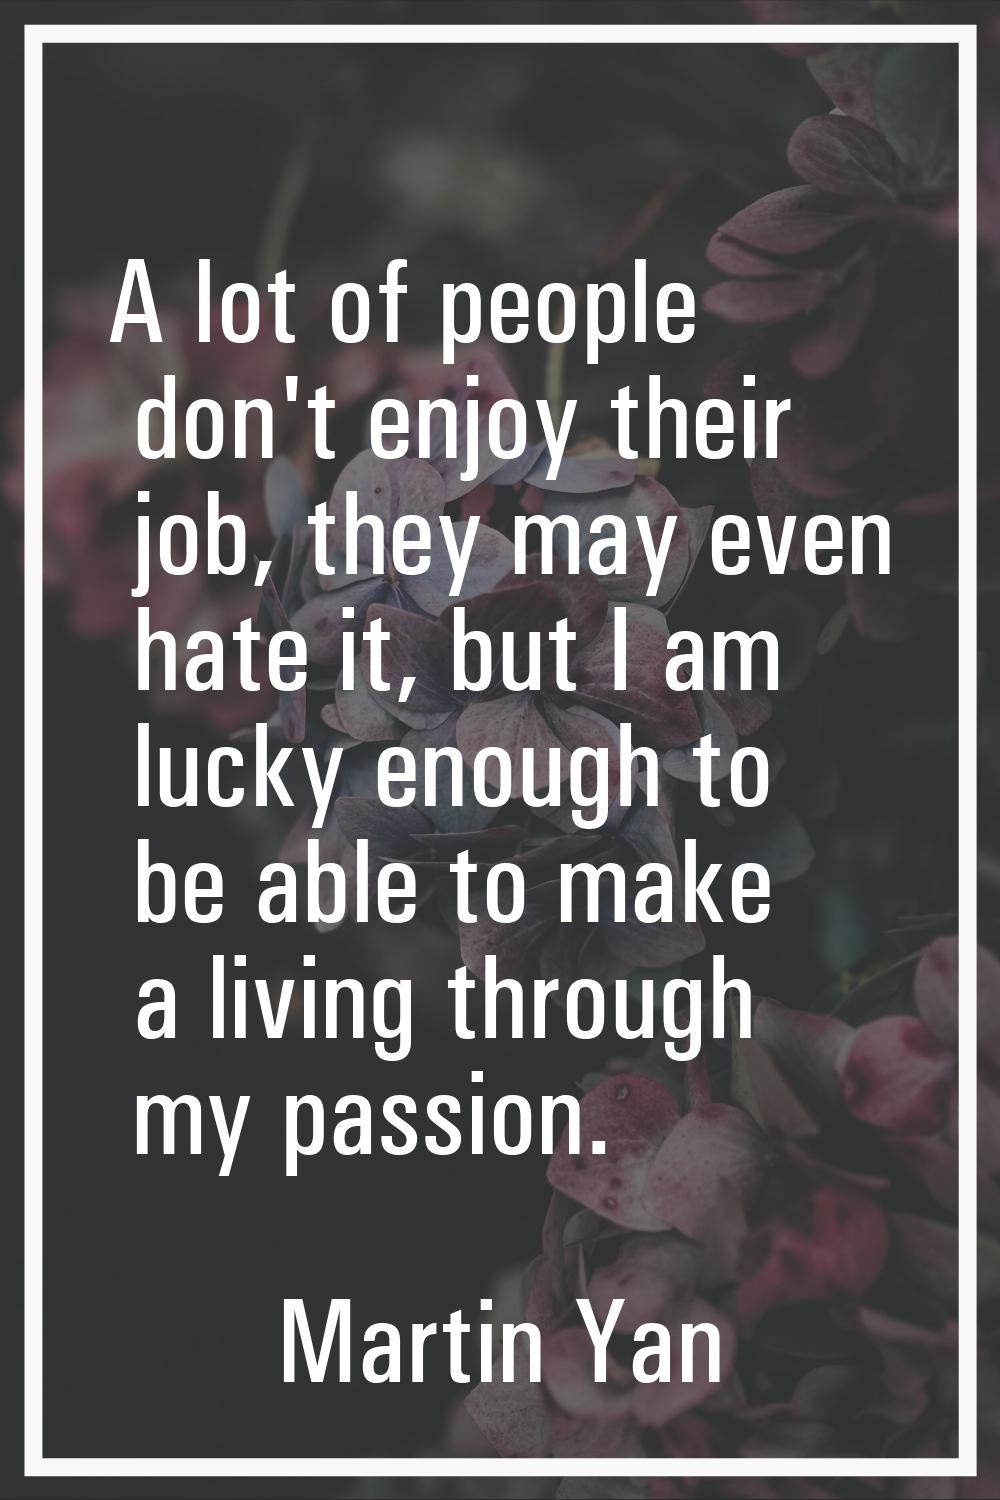 A lot of people don't enjoy their job, they may even hate it, but I am lucky enough to be able to m